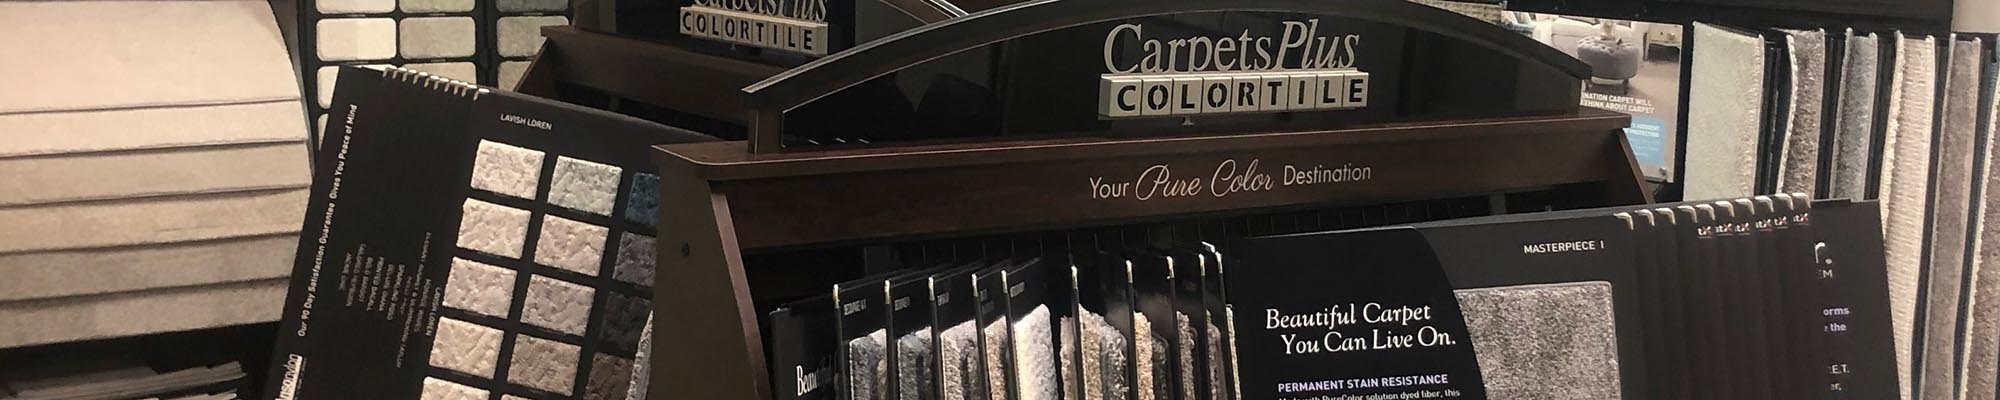 Local Flooring Retailer in North Liberty, IA - Carpet Tree providing a wide selection of flooring and expert advice.